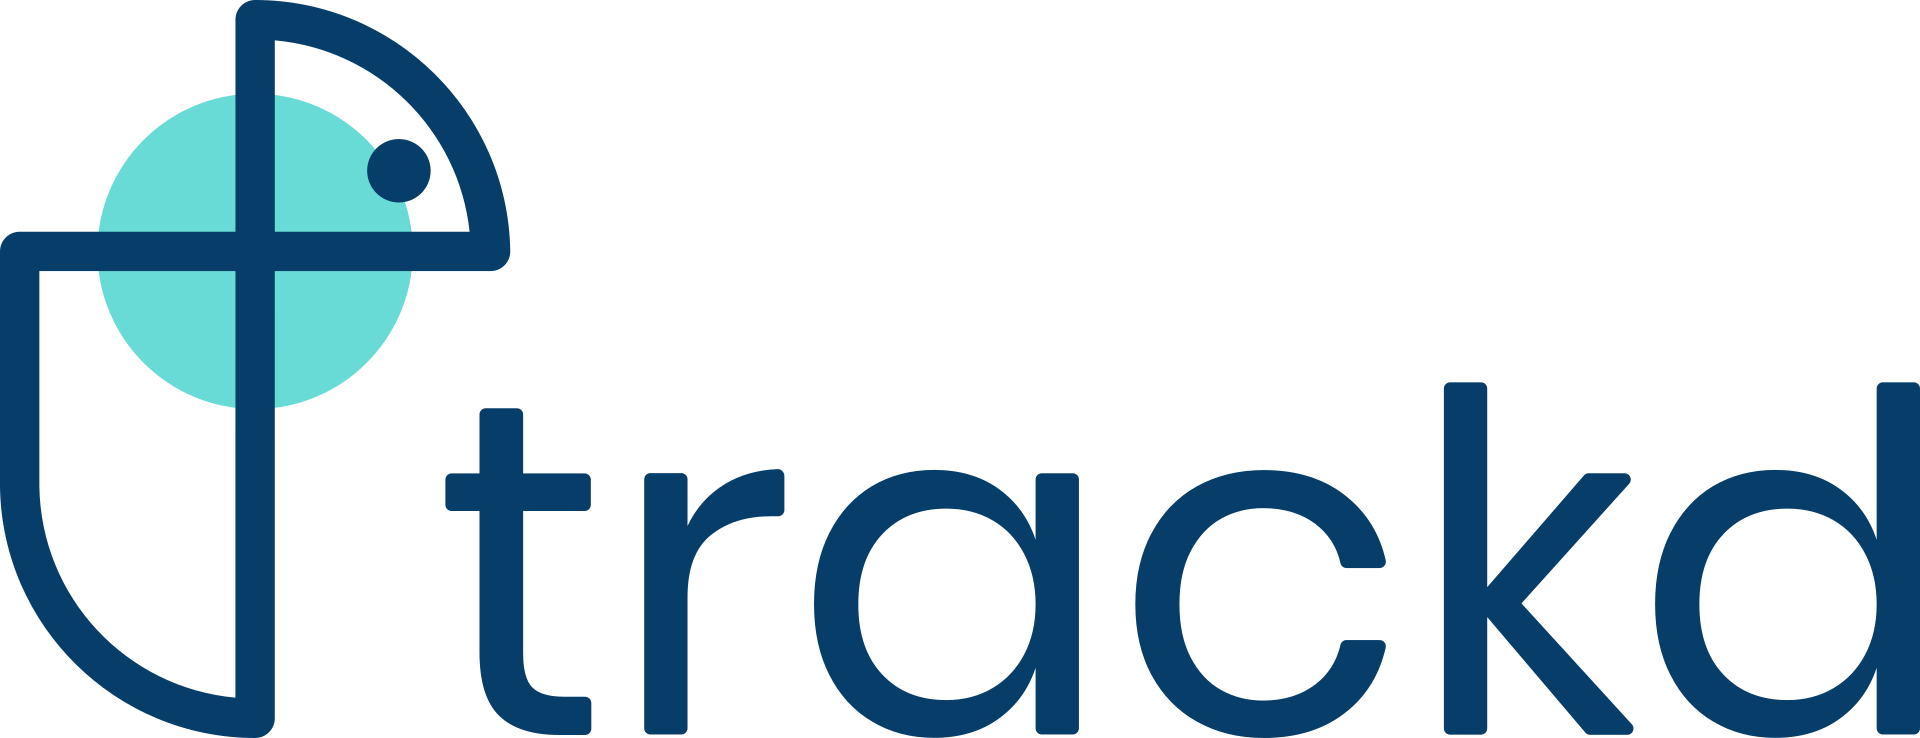 trackd is bringing crowdsourcing and collective defense to vulnerability remediation and patch management